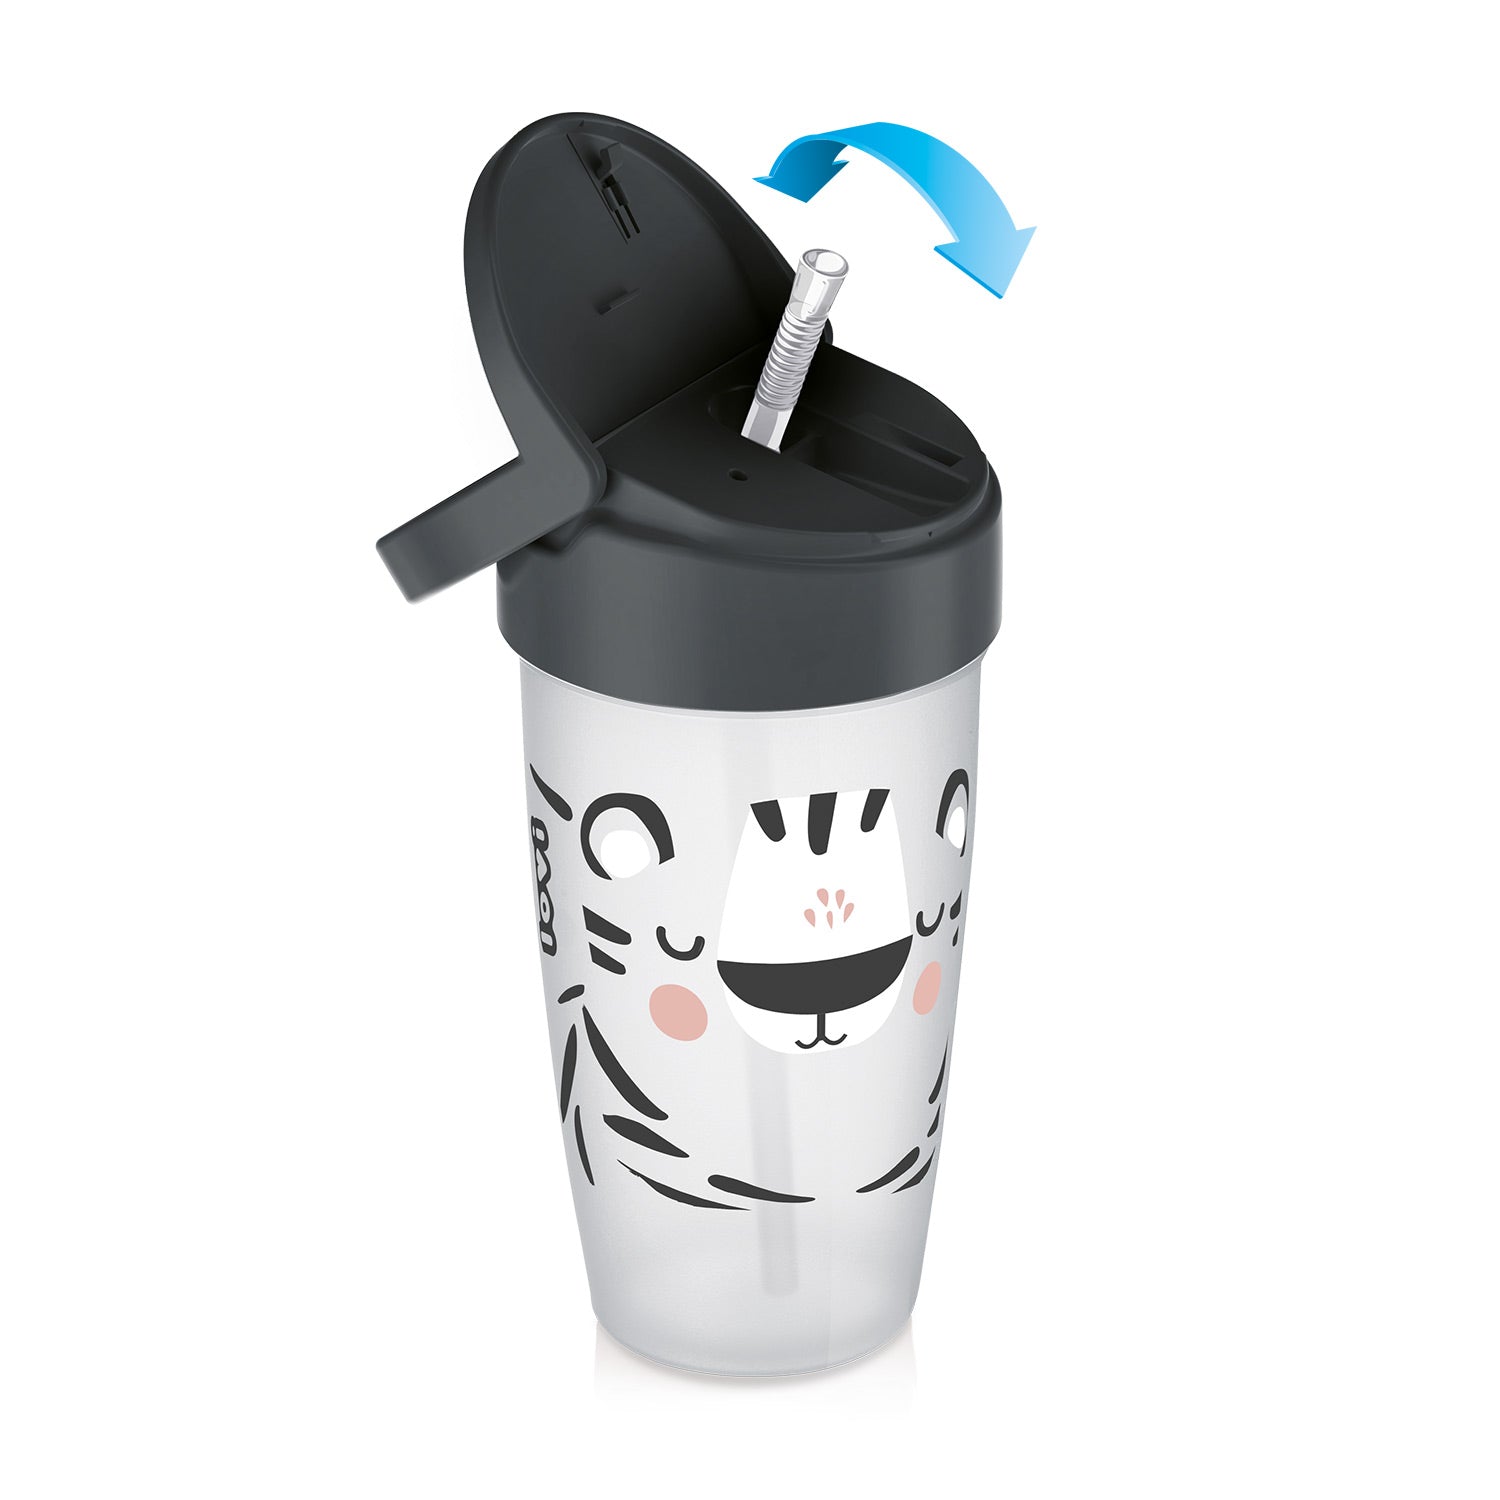 Lovi: Freestyle cup with straw 350 ml